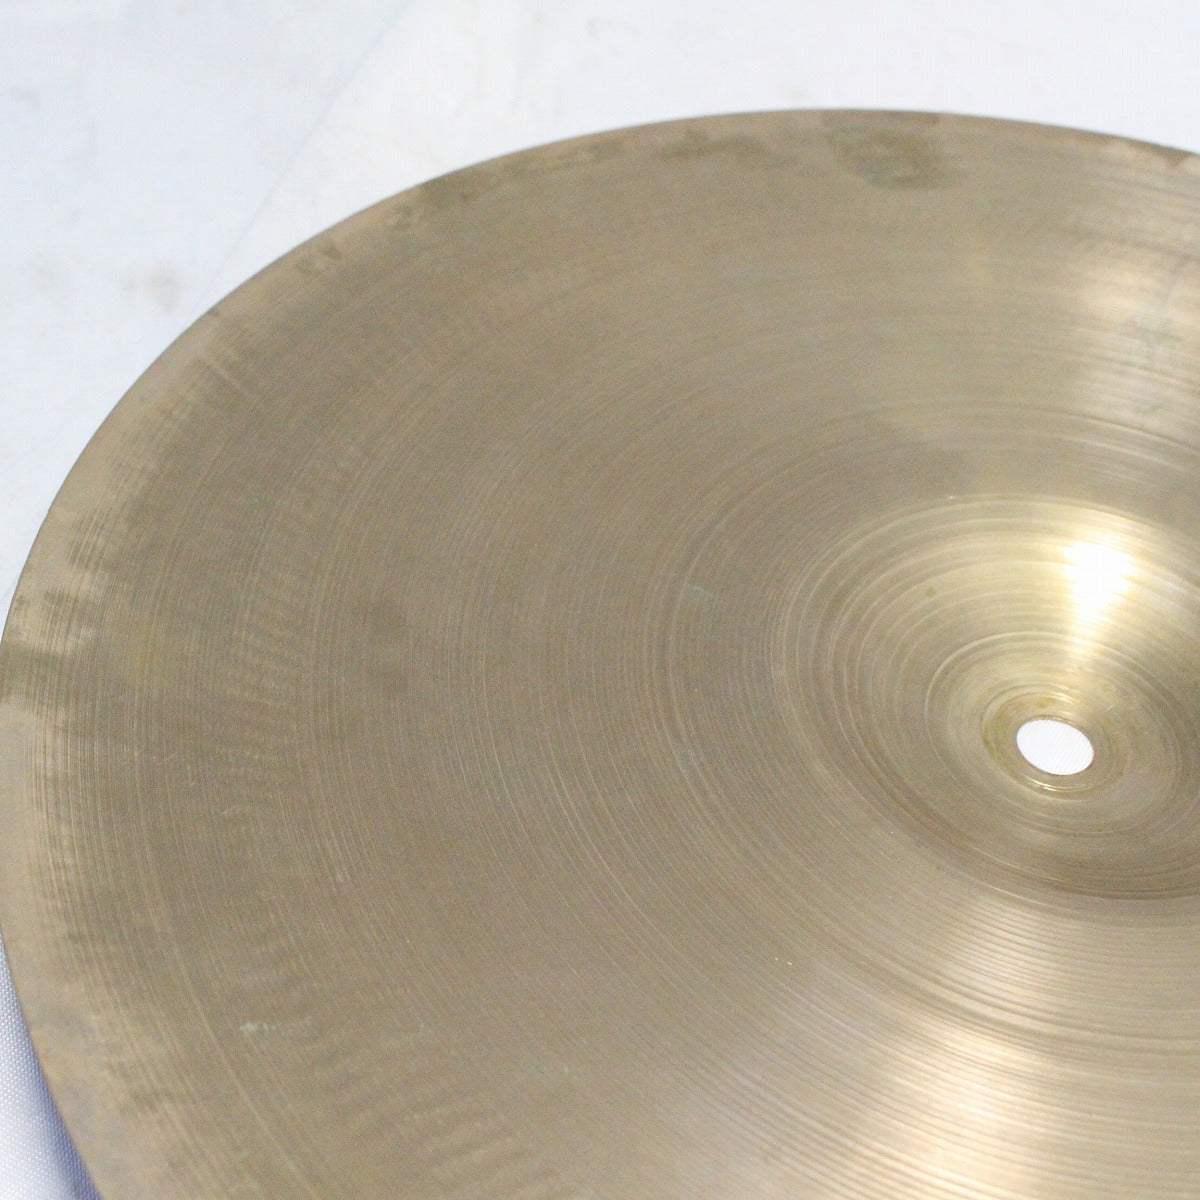 USED ZILDJIAN / A Trans Stamp Type III (1950-52) 14" 706g HiHat Top only [08]